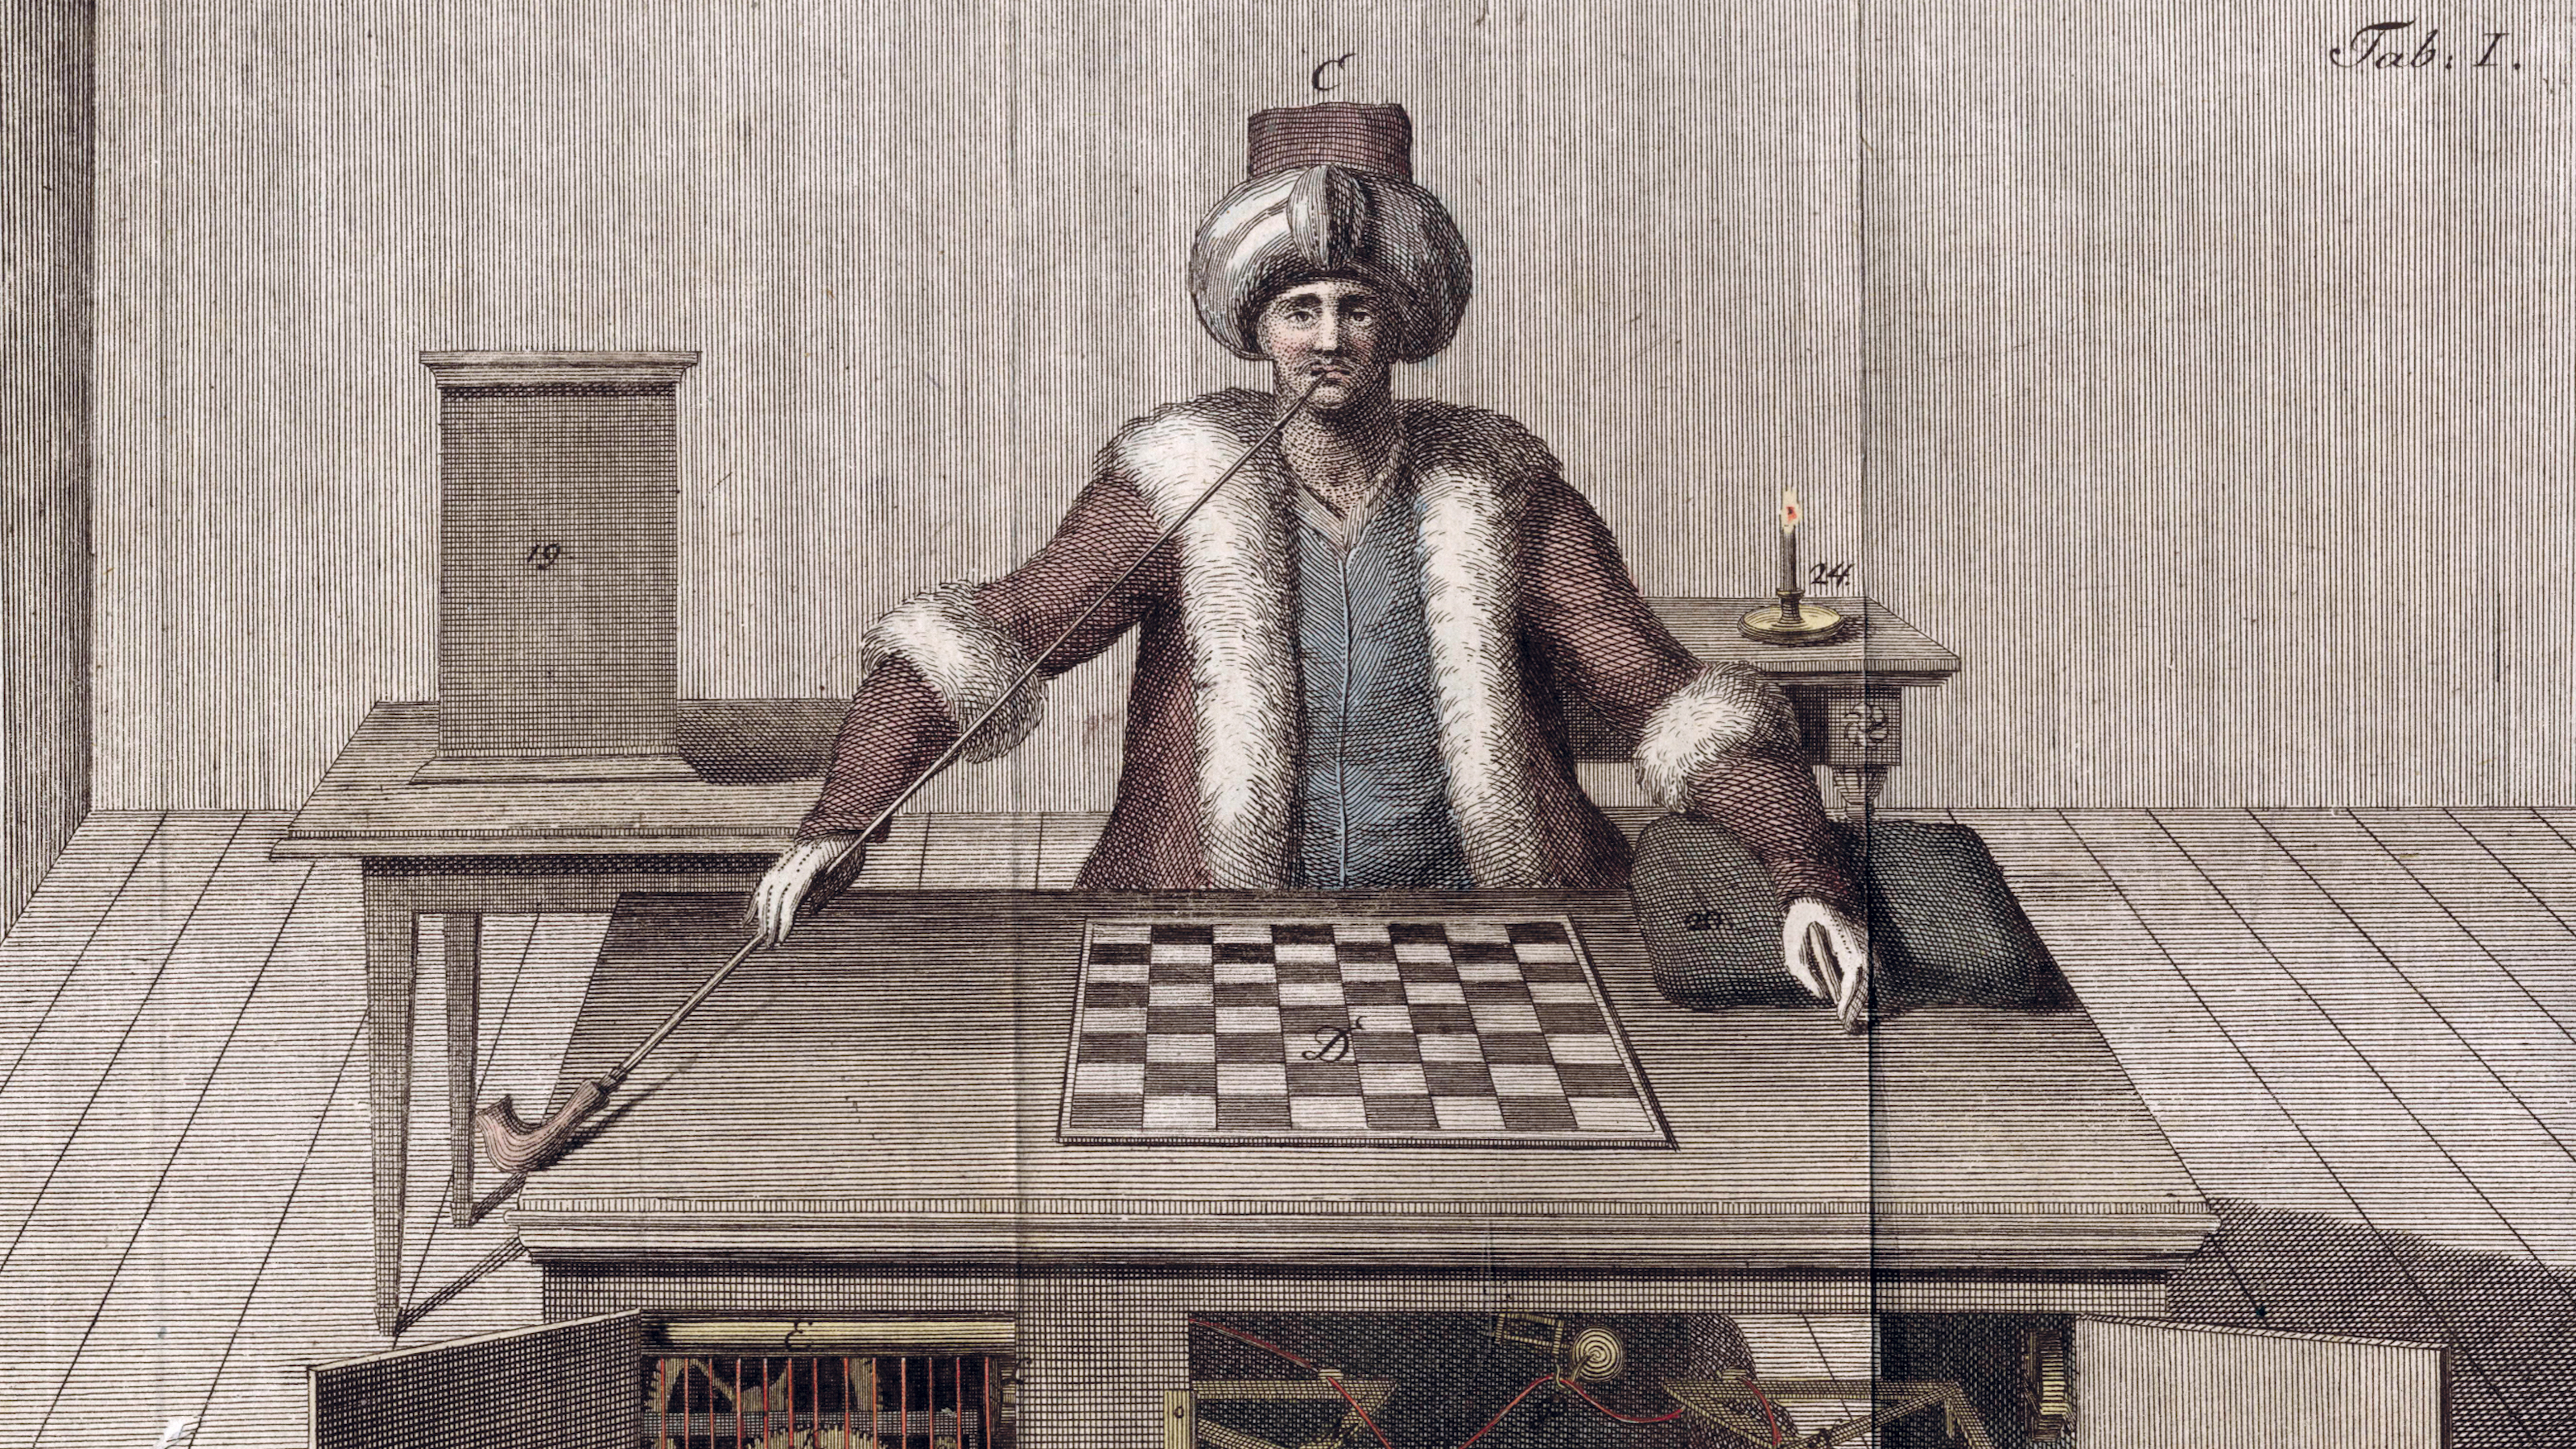 A historical illustration depicts an automaton dressed in Ottoman attire, seated behind a chessboard with mechanical components visible below the table, showcasing an early concept akin to mind-body AI.